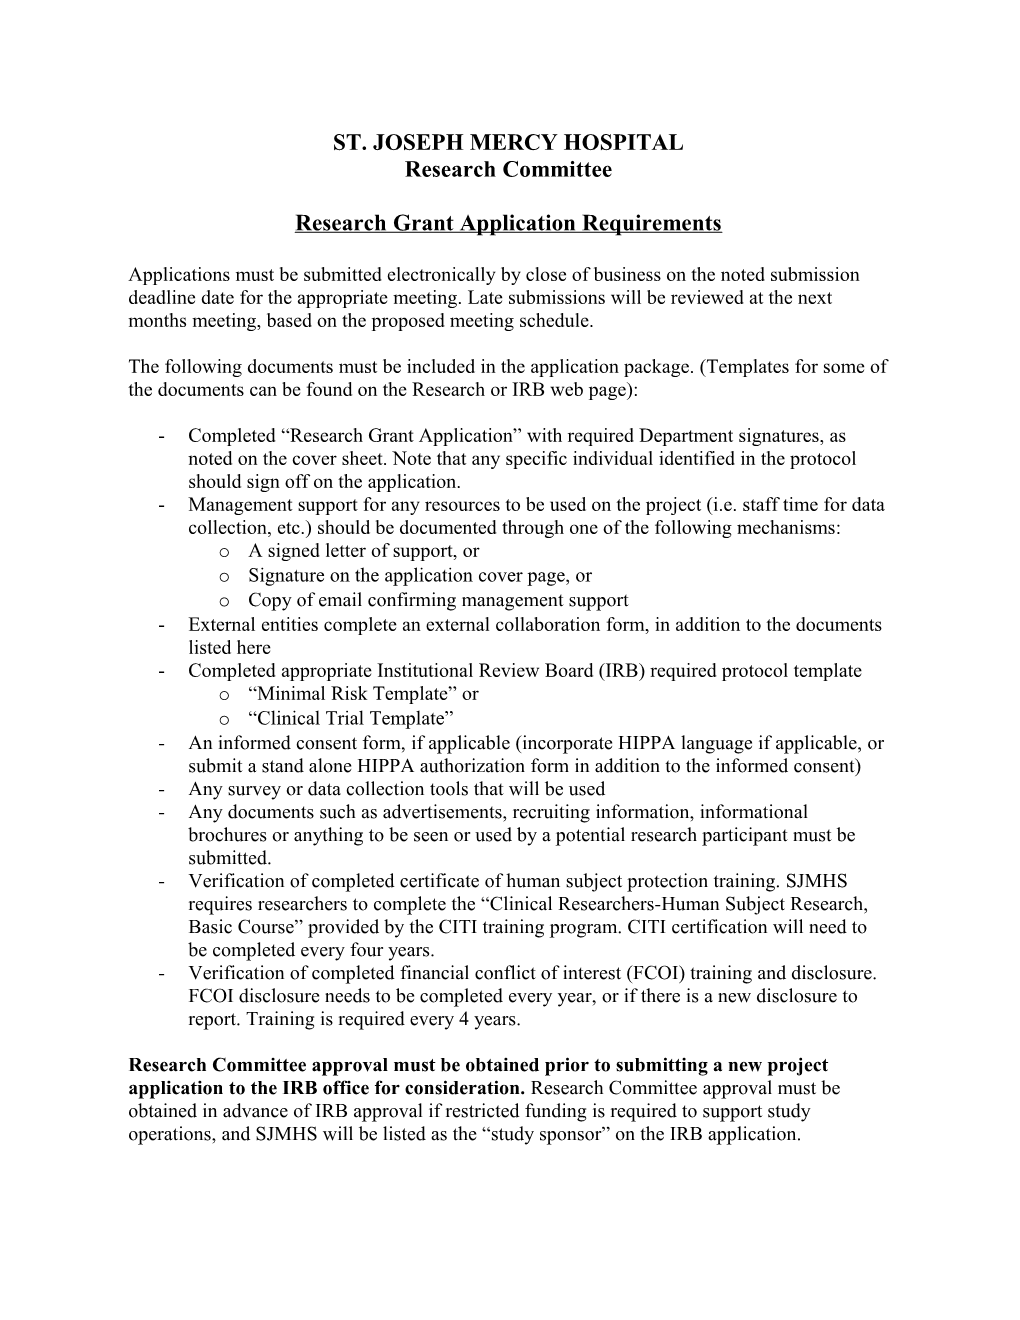 Research Grant Application Requirements